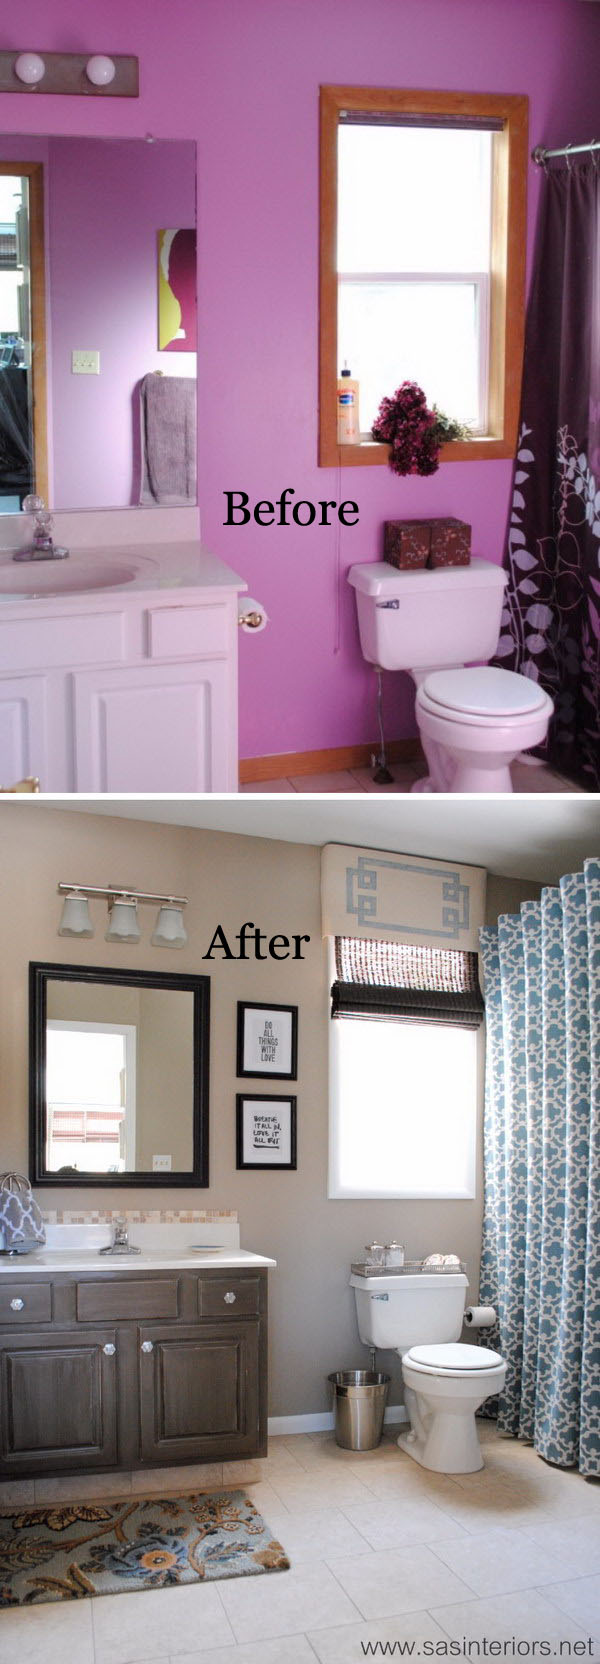 From Horrid Purple to Heavenly Gray and Beige Master Bathroom Makeover. 